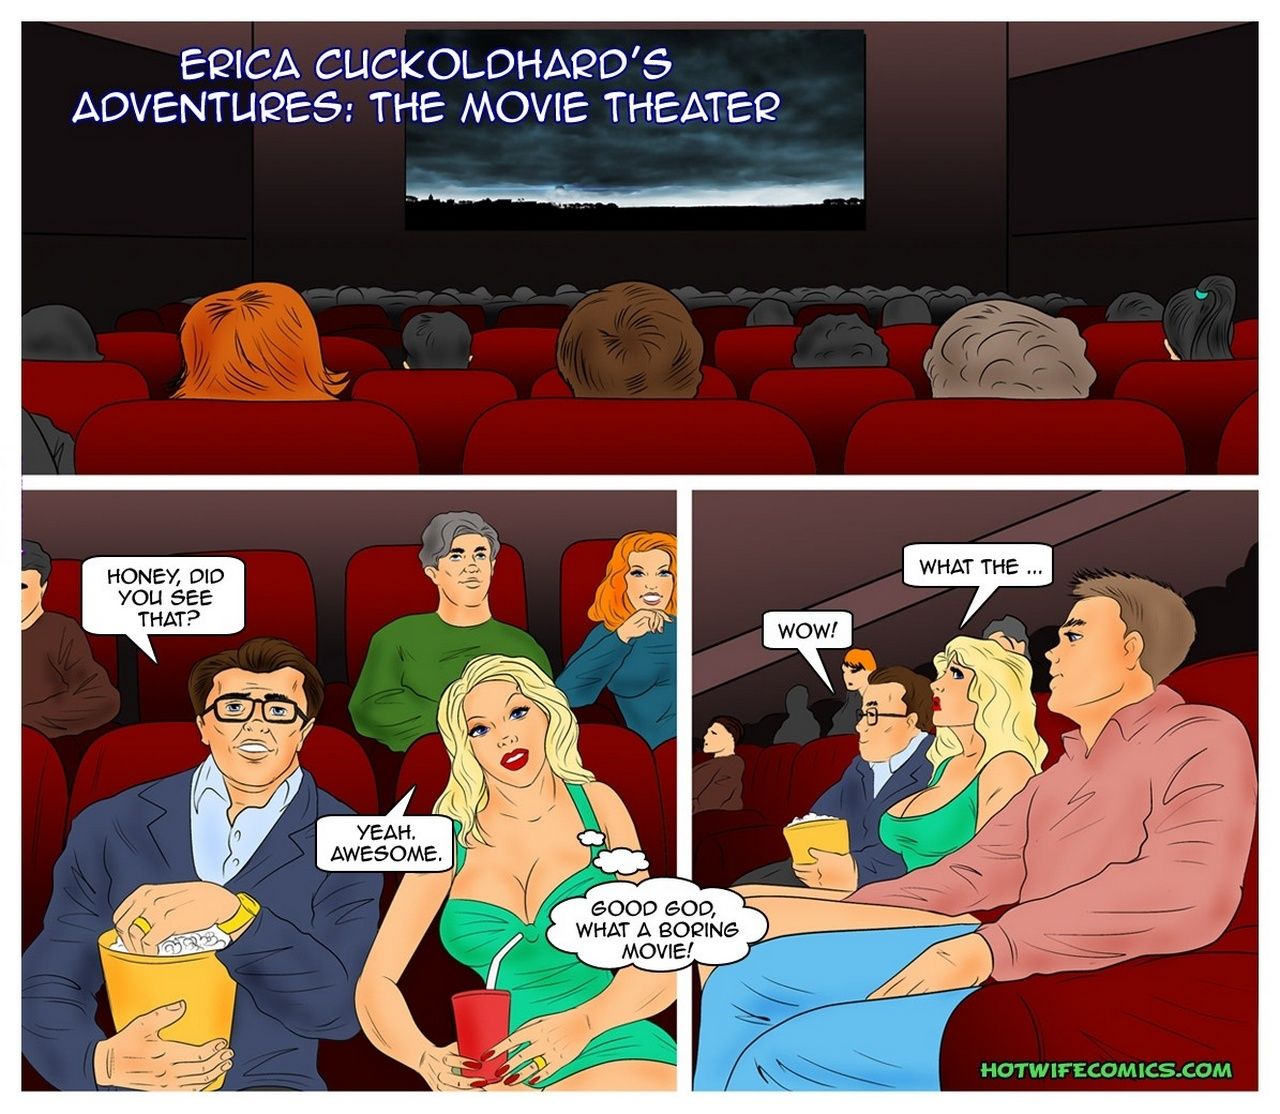 Erica Cuckoldhard's Adventures - The Movie Theatre page 2